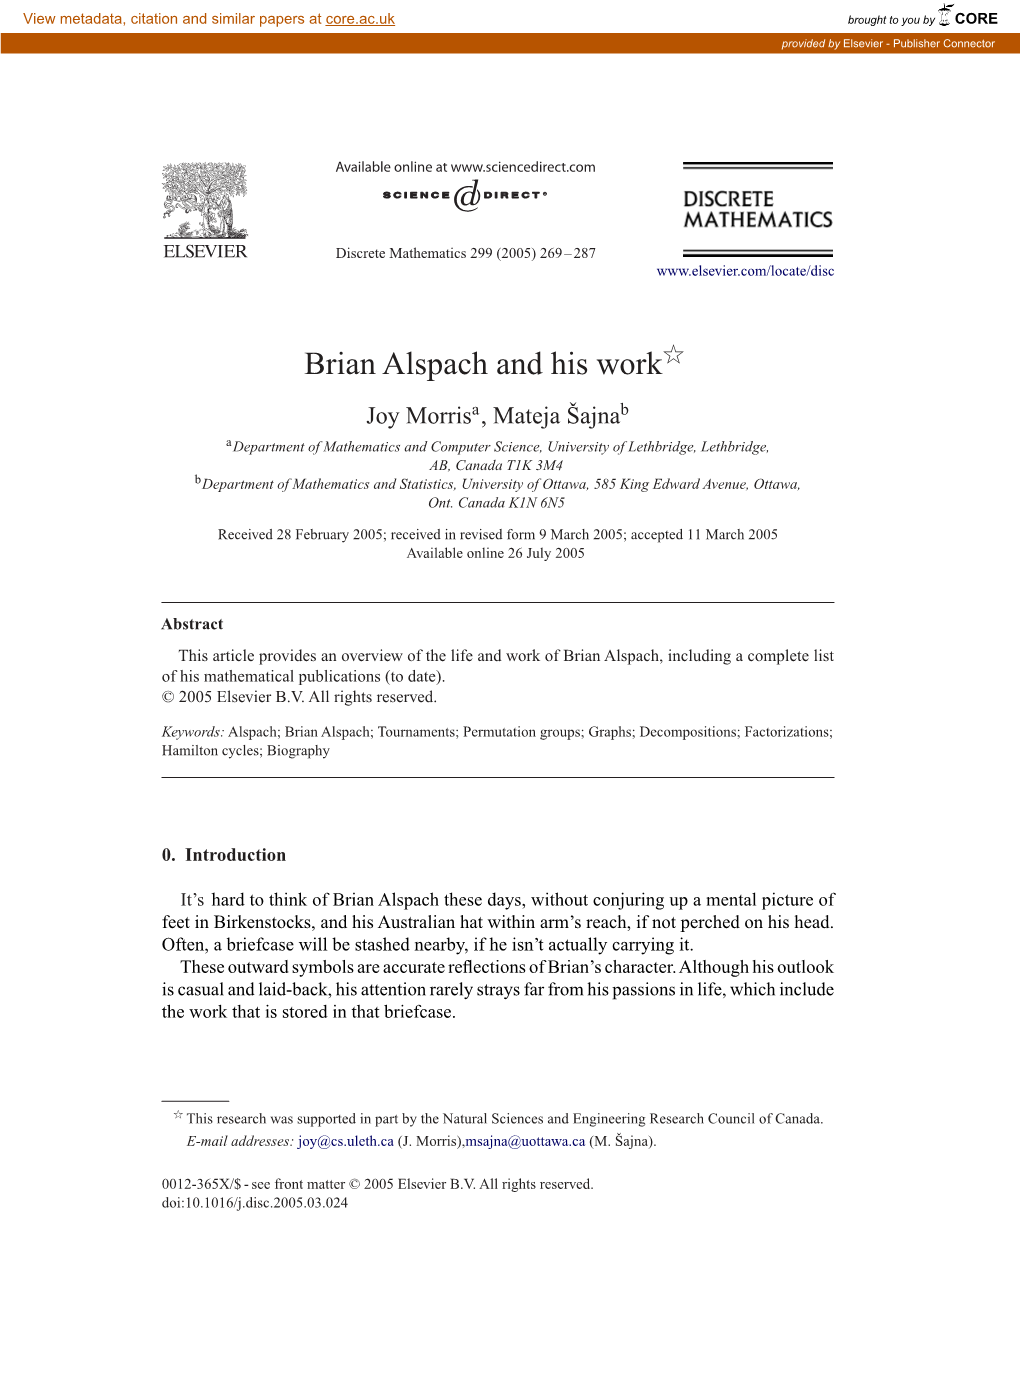 Brian Alspach and His Work